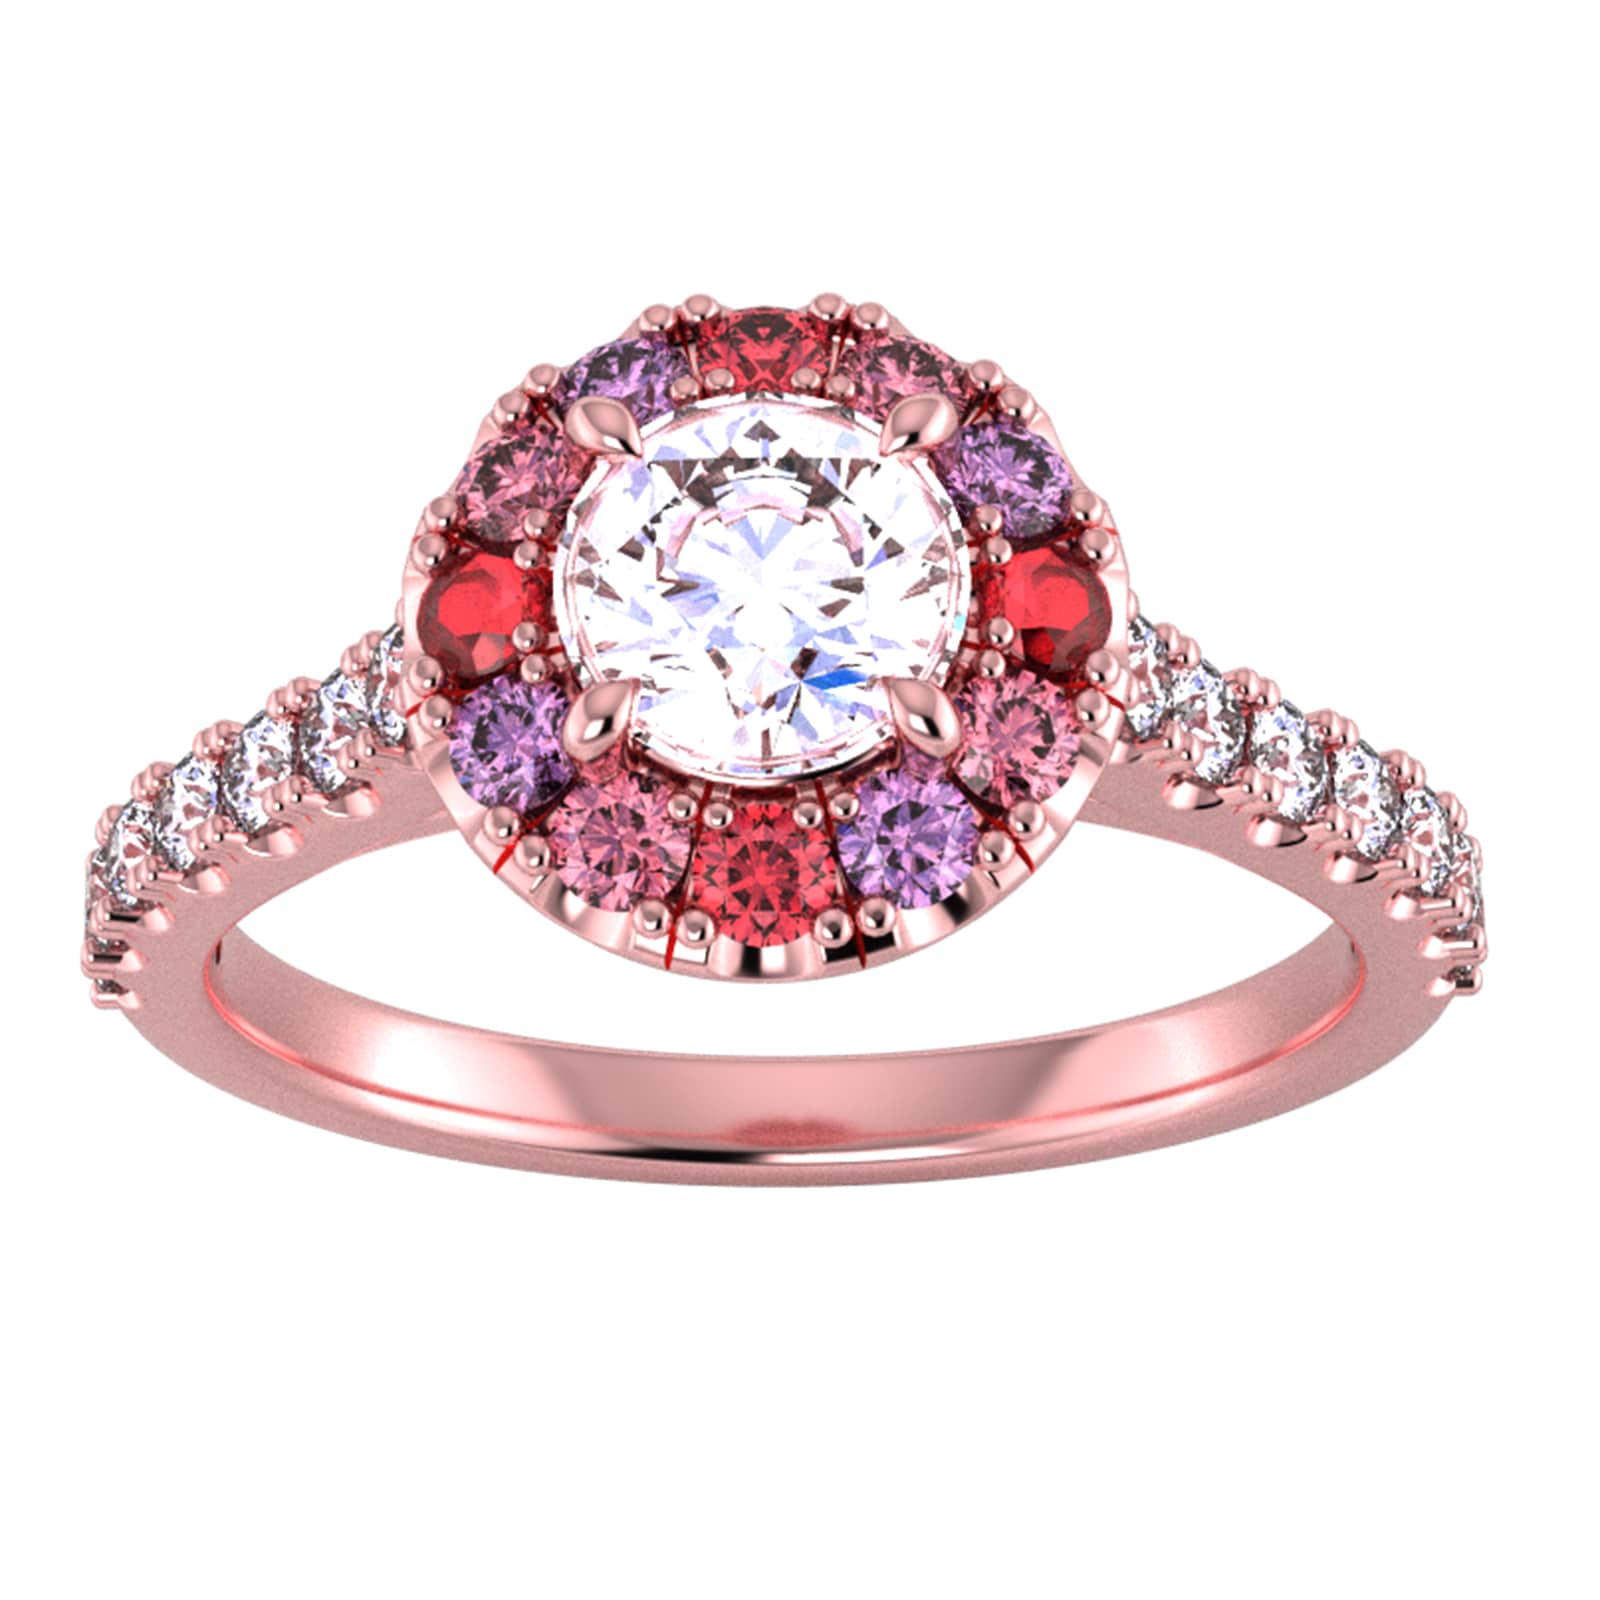 9ct Rose Gold Diamond & Pink, Red, Purple Sapphire Halo Ring - Ring Size X.5